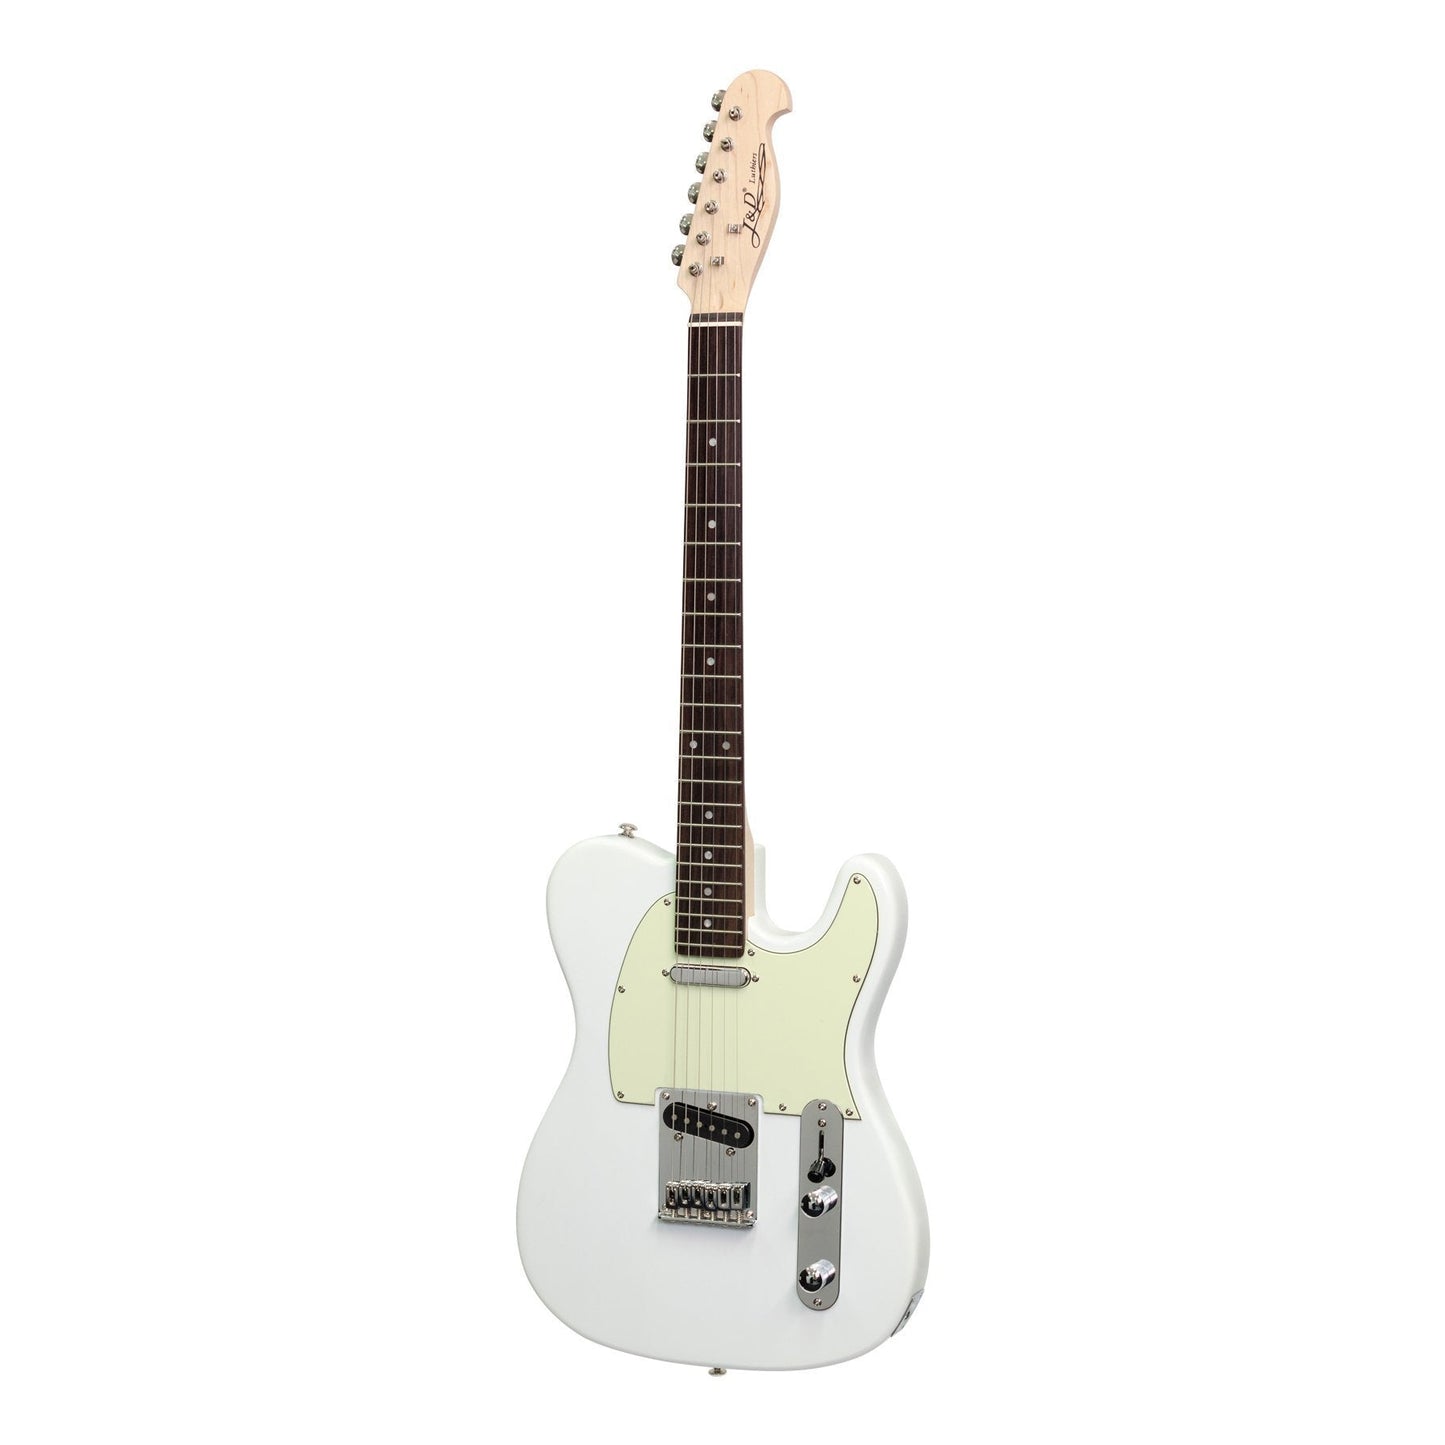 J&D Luthiers TE-Style Electric Guitar (White)